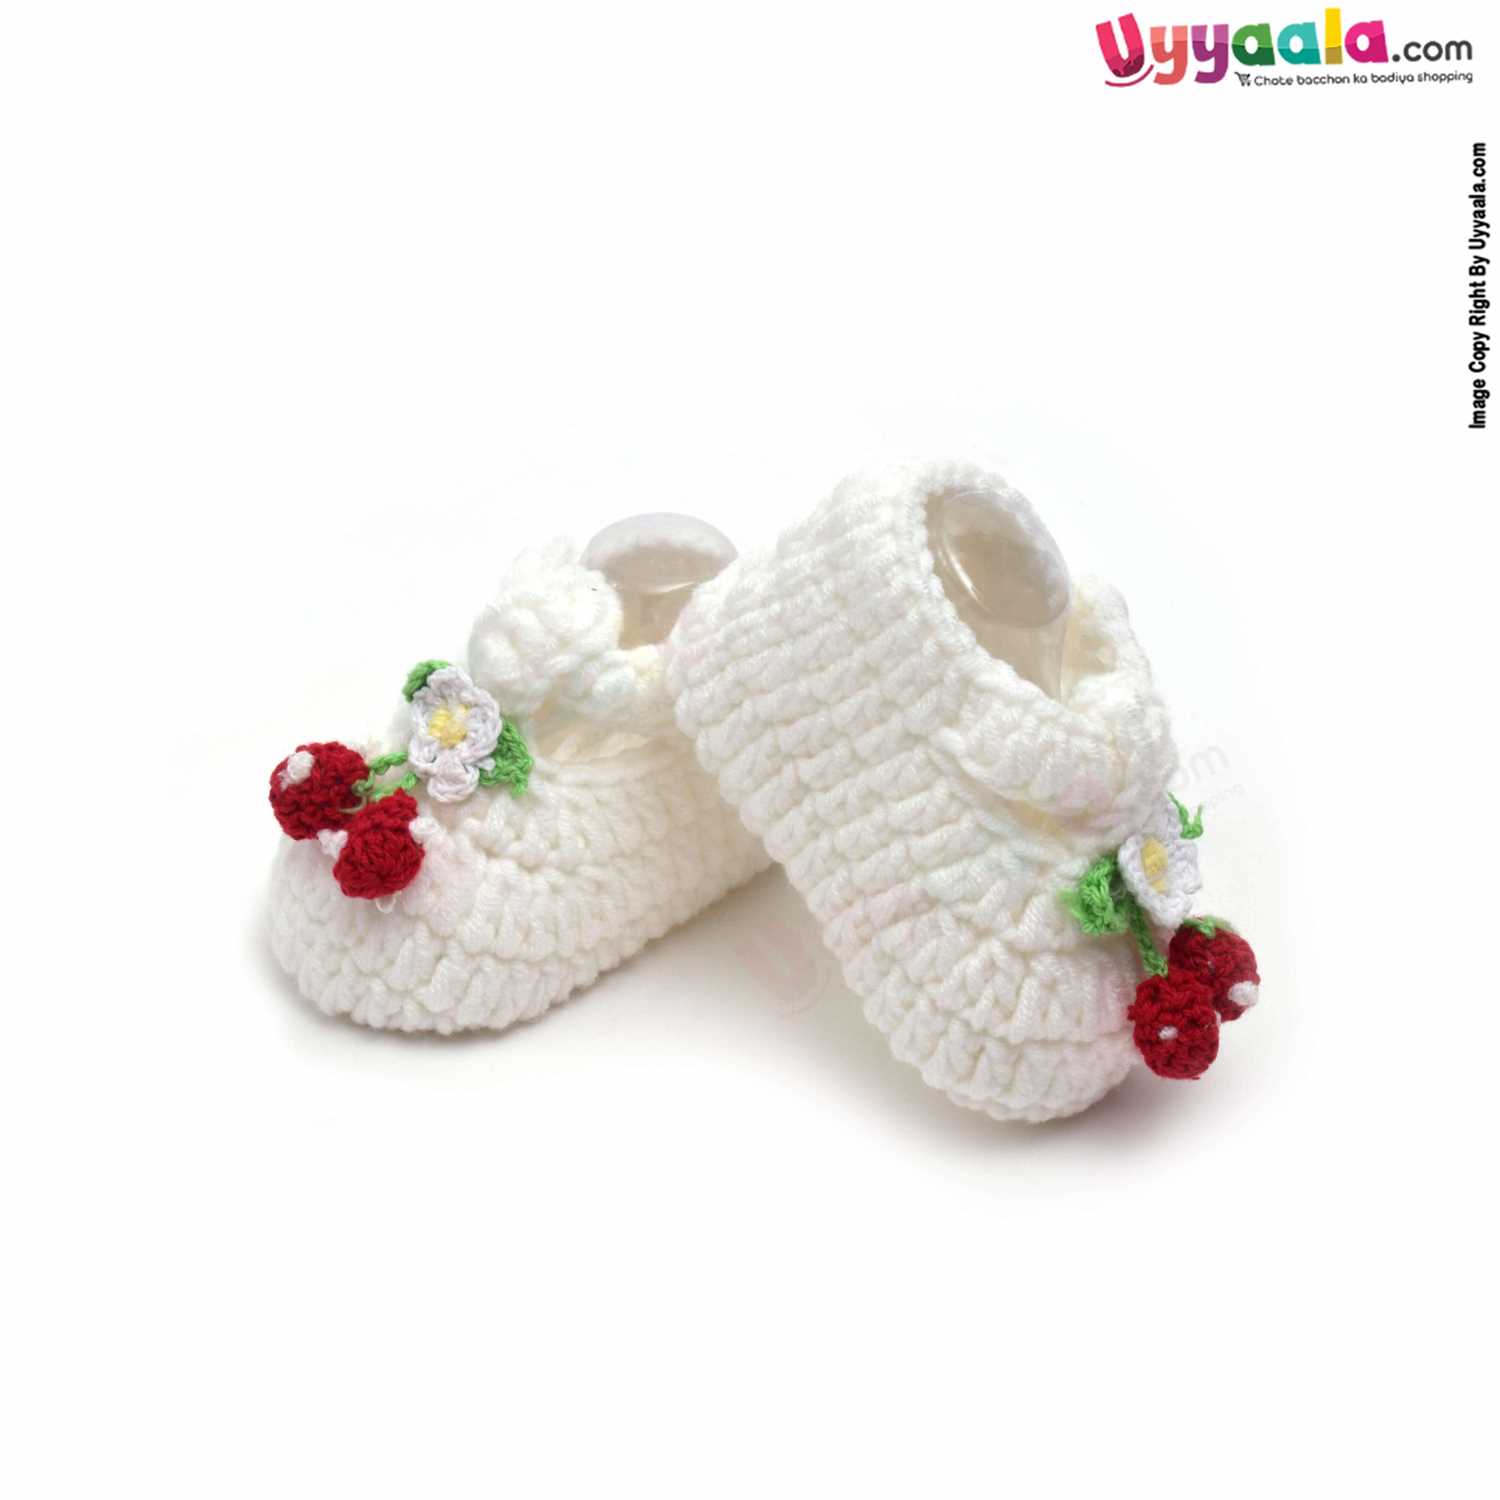 Woolen Hand Knitted Socks for New Born 0-6m Age - White